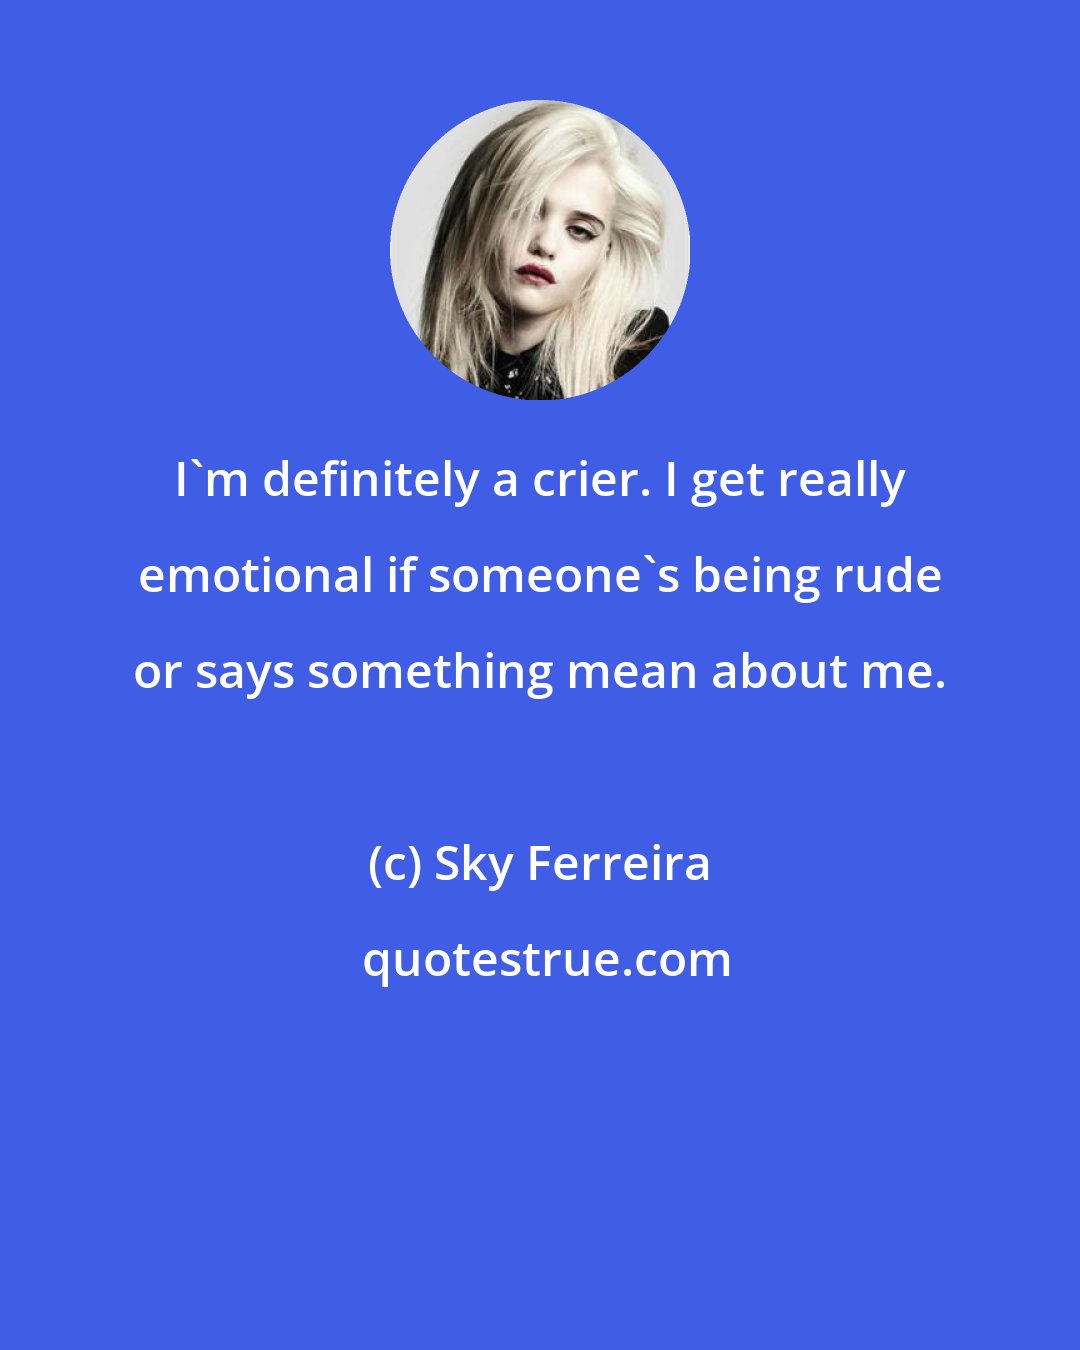 Sky Ferreira: I'm definitely a crier. I get really emotional if someone's being rude or says something mean about me.